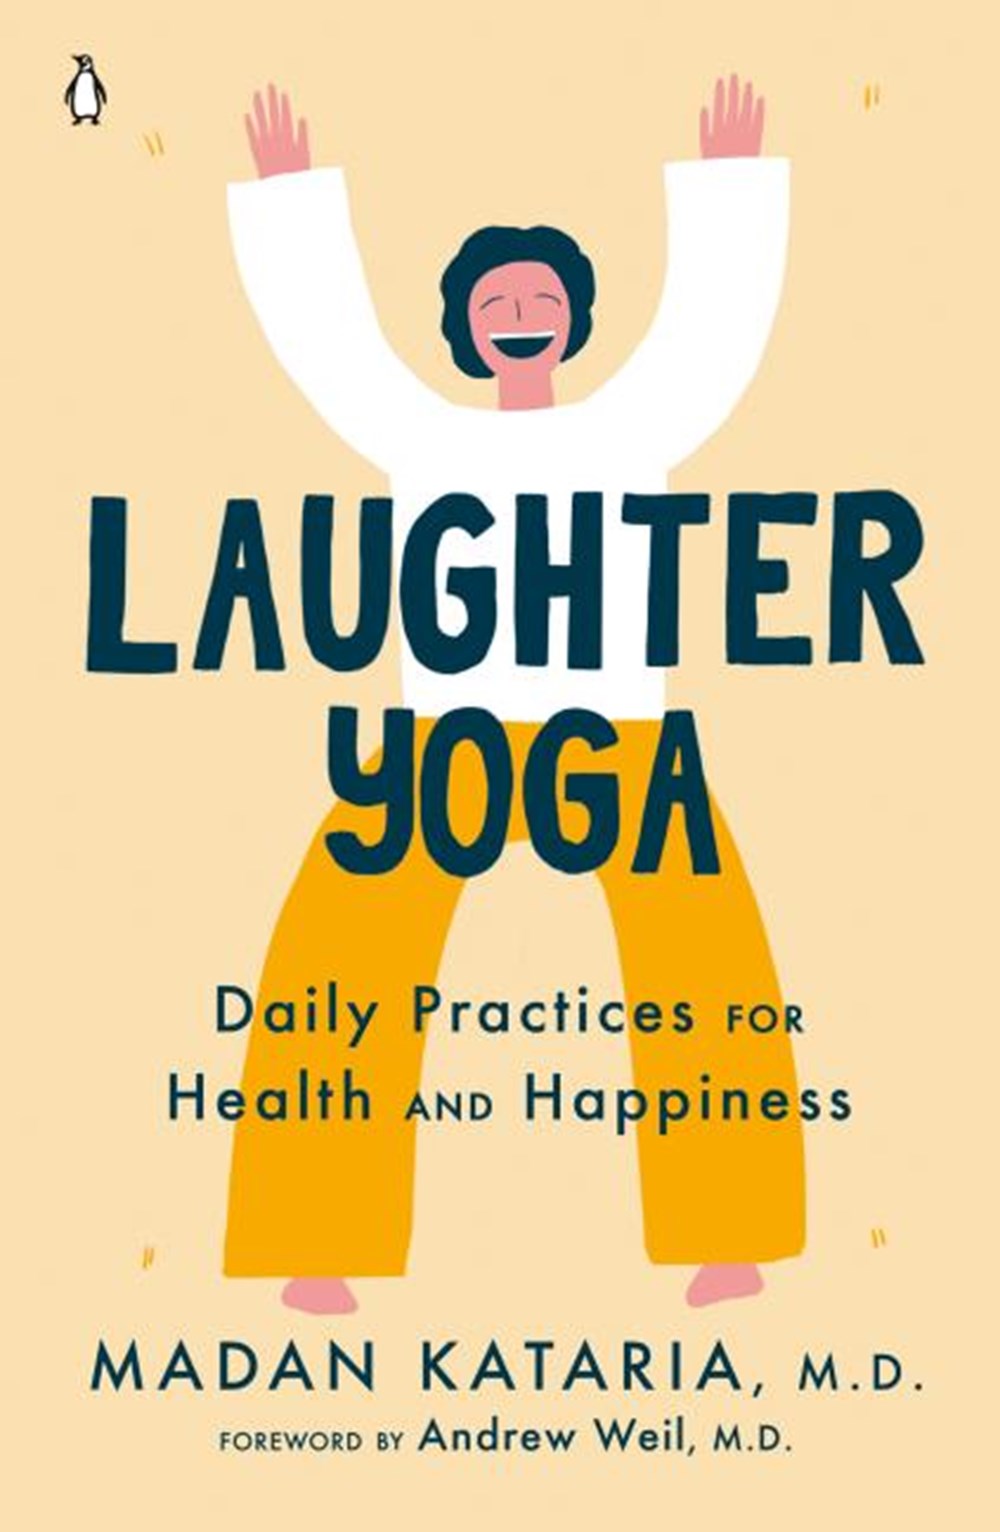 Laughter Yoga Daily Practices for Health and Happiness